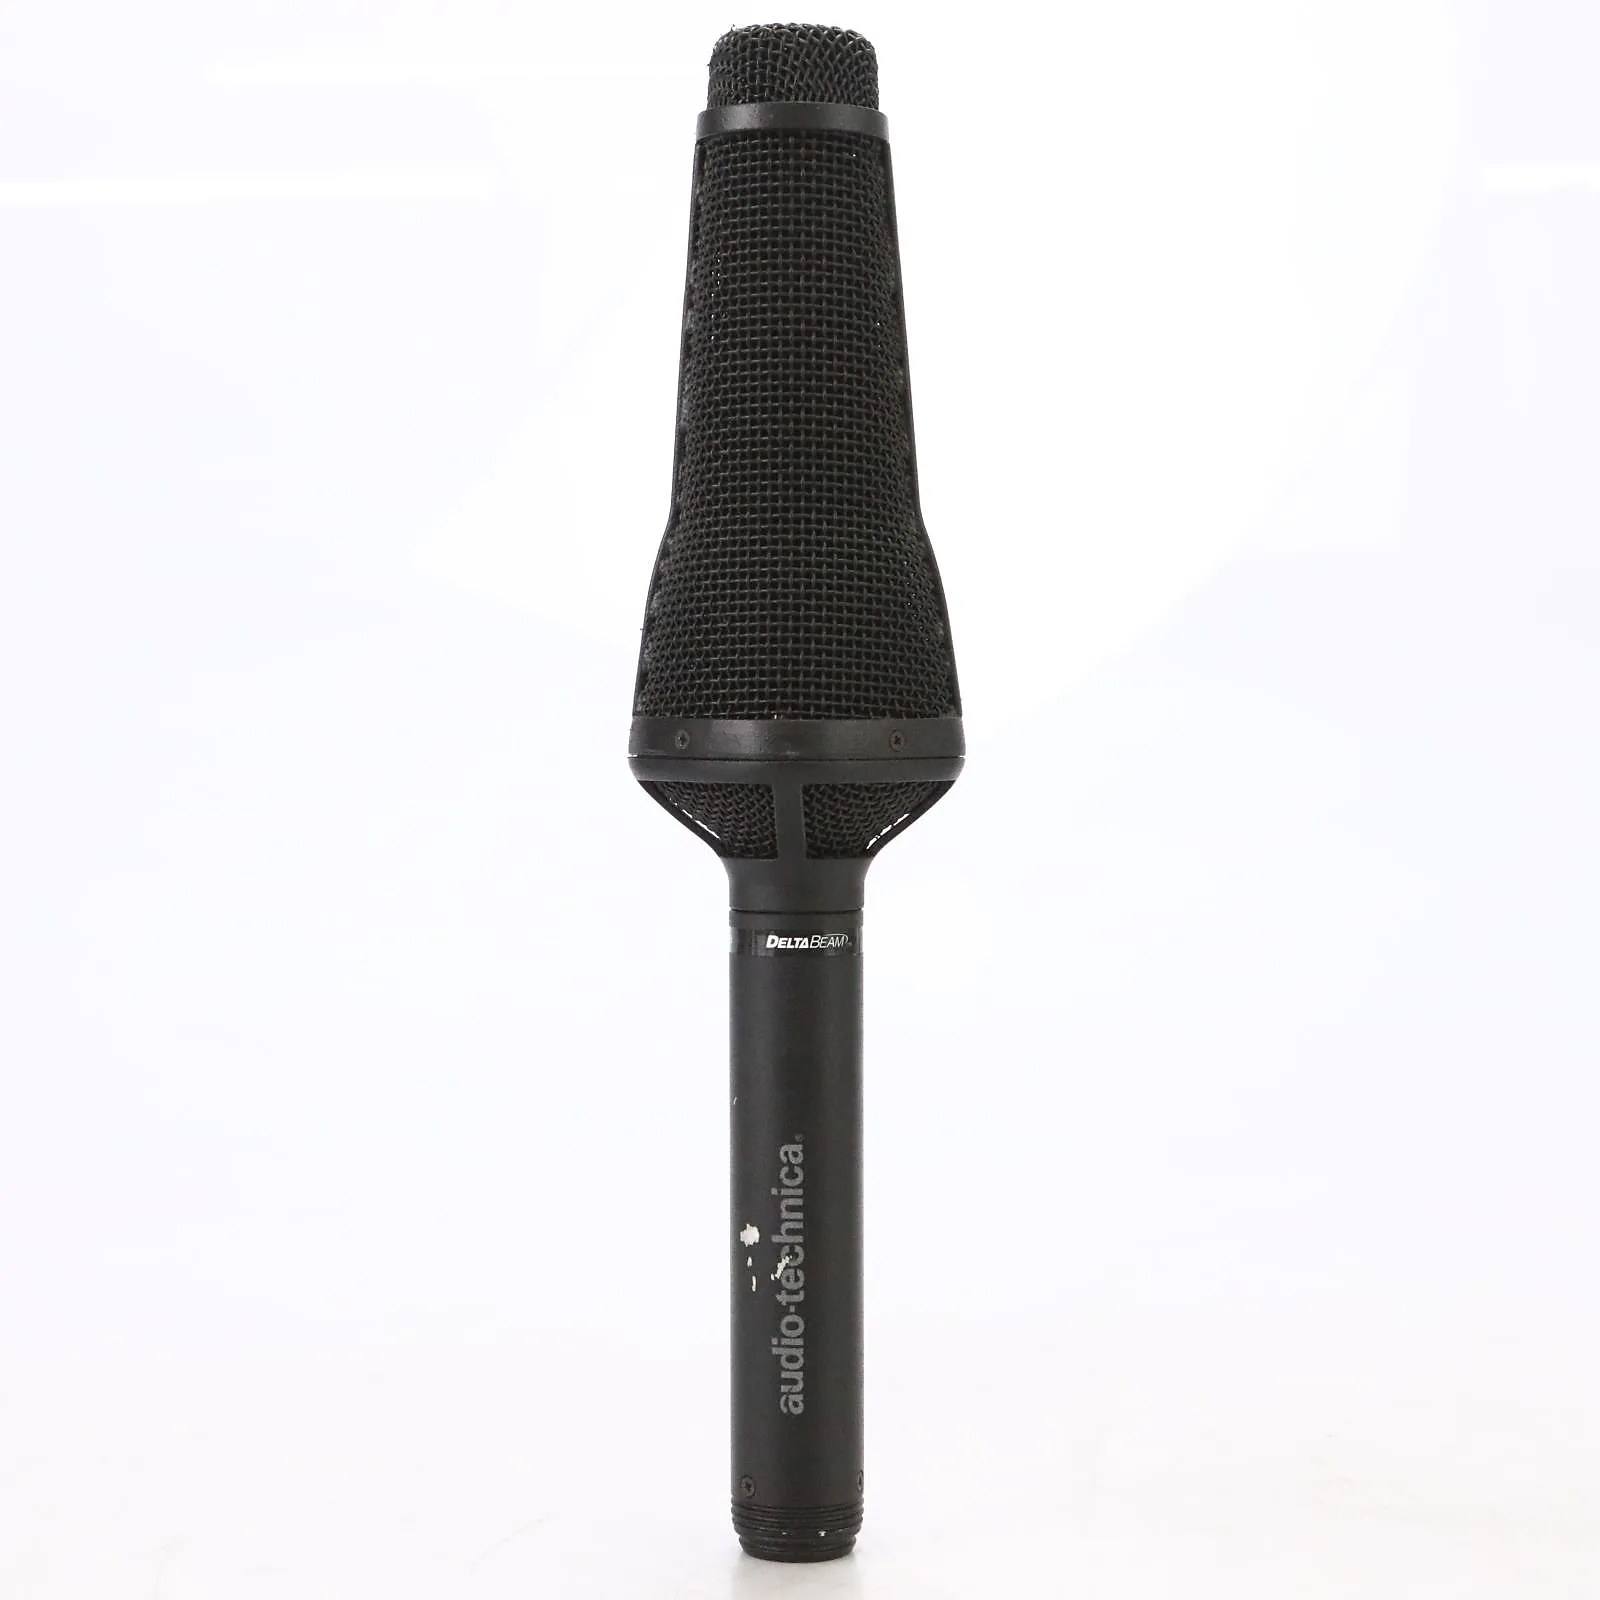 AT895 directional microphone